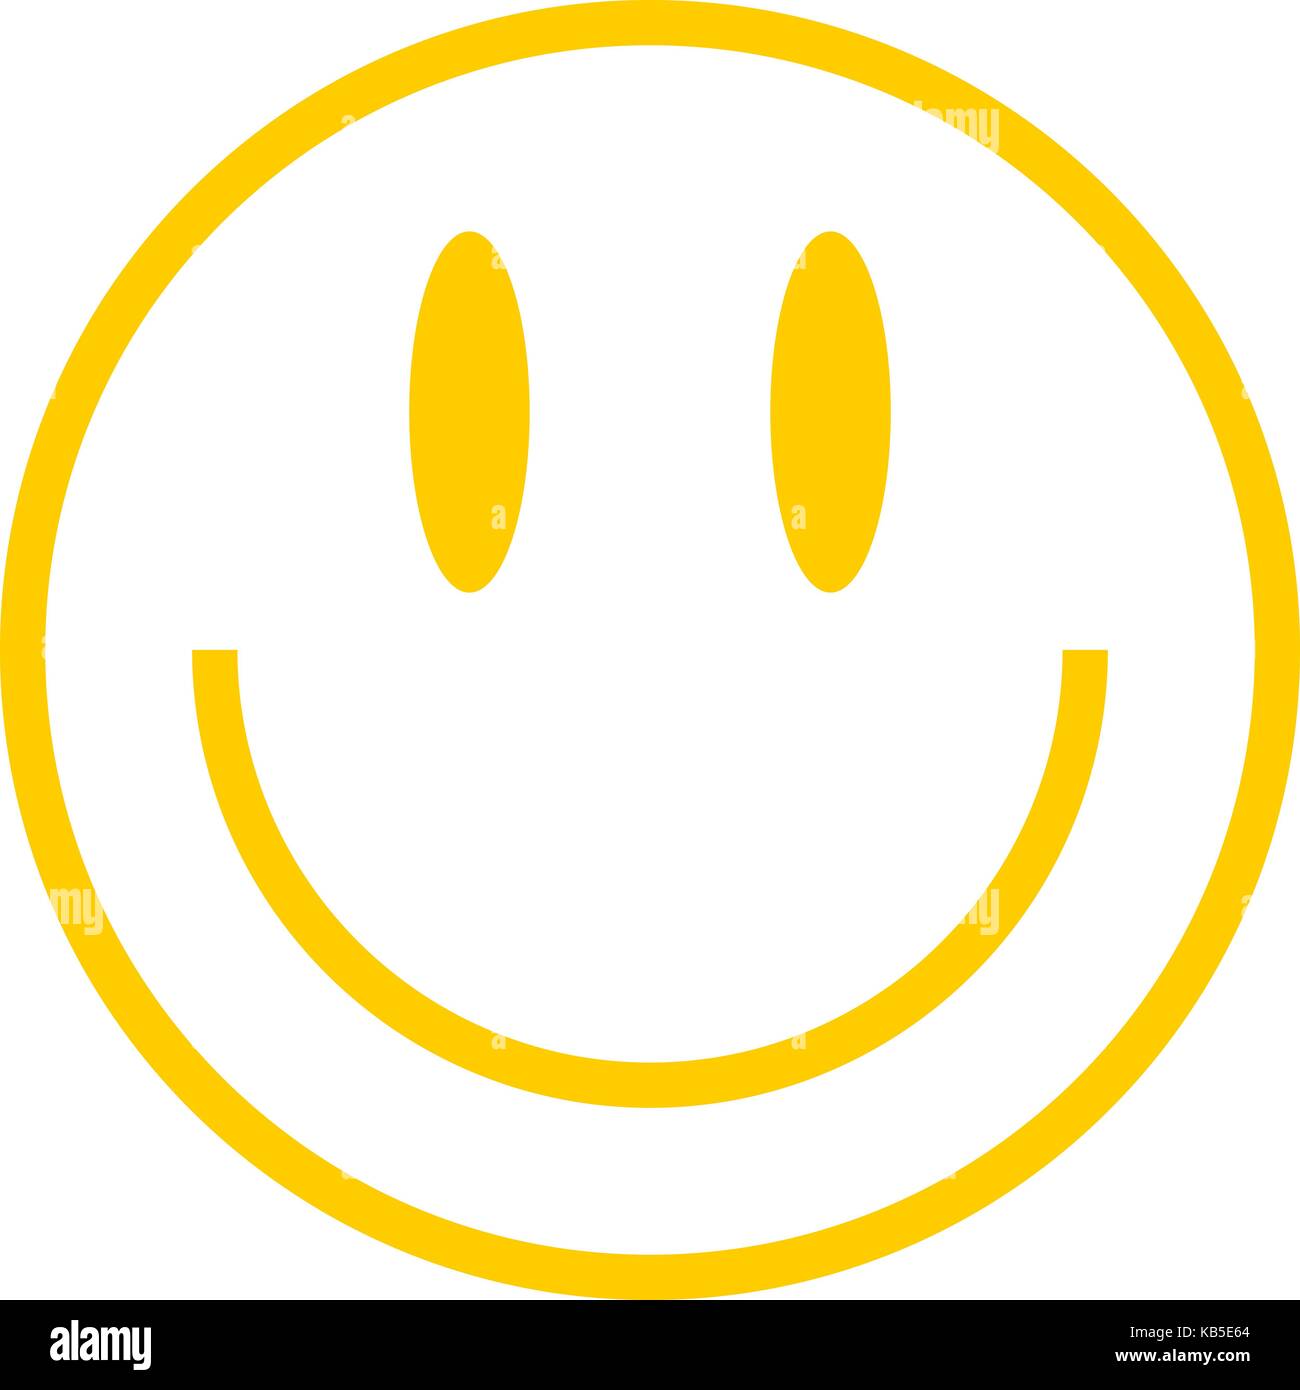 Use it in all your designs. Smiley happy smiling face emoticon icon in flat style. Quick and easy recolorable vector illustration graphic Stock Vector